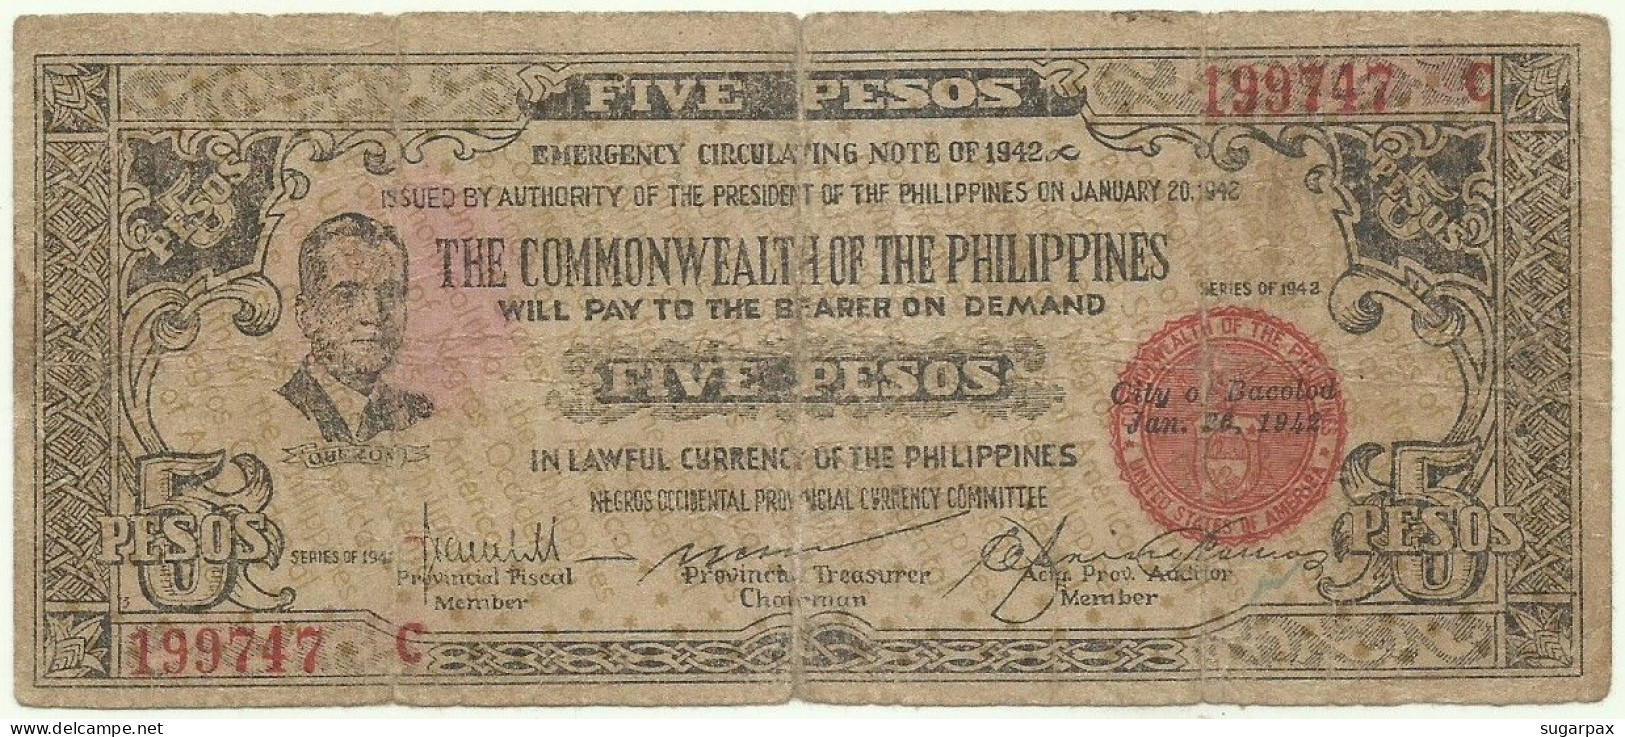 PHILIPPINES - 5 Pesos - 1942 - Pick S 648.a - Serie C - NEGROS Occidental Provincial Currency Committee - Philippines